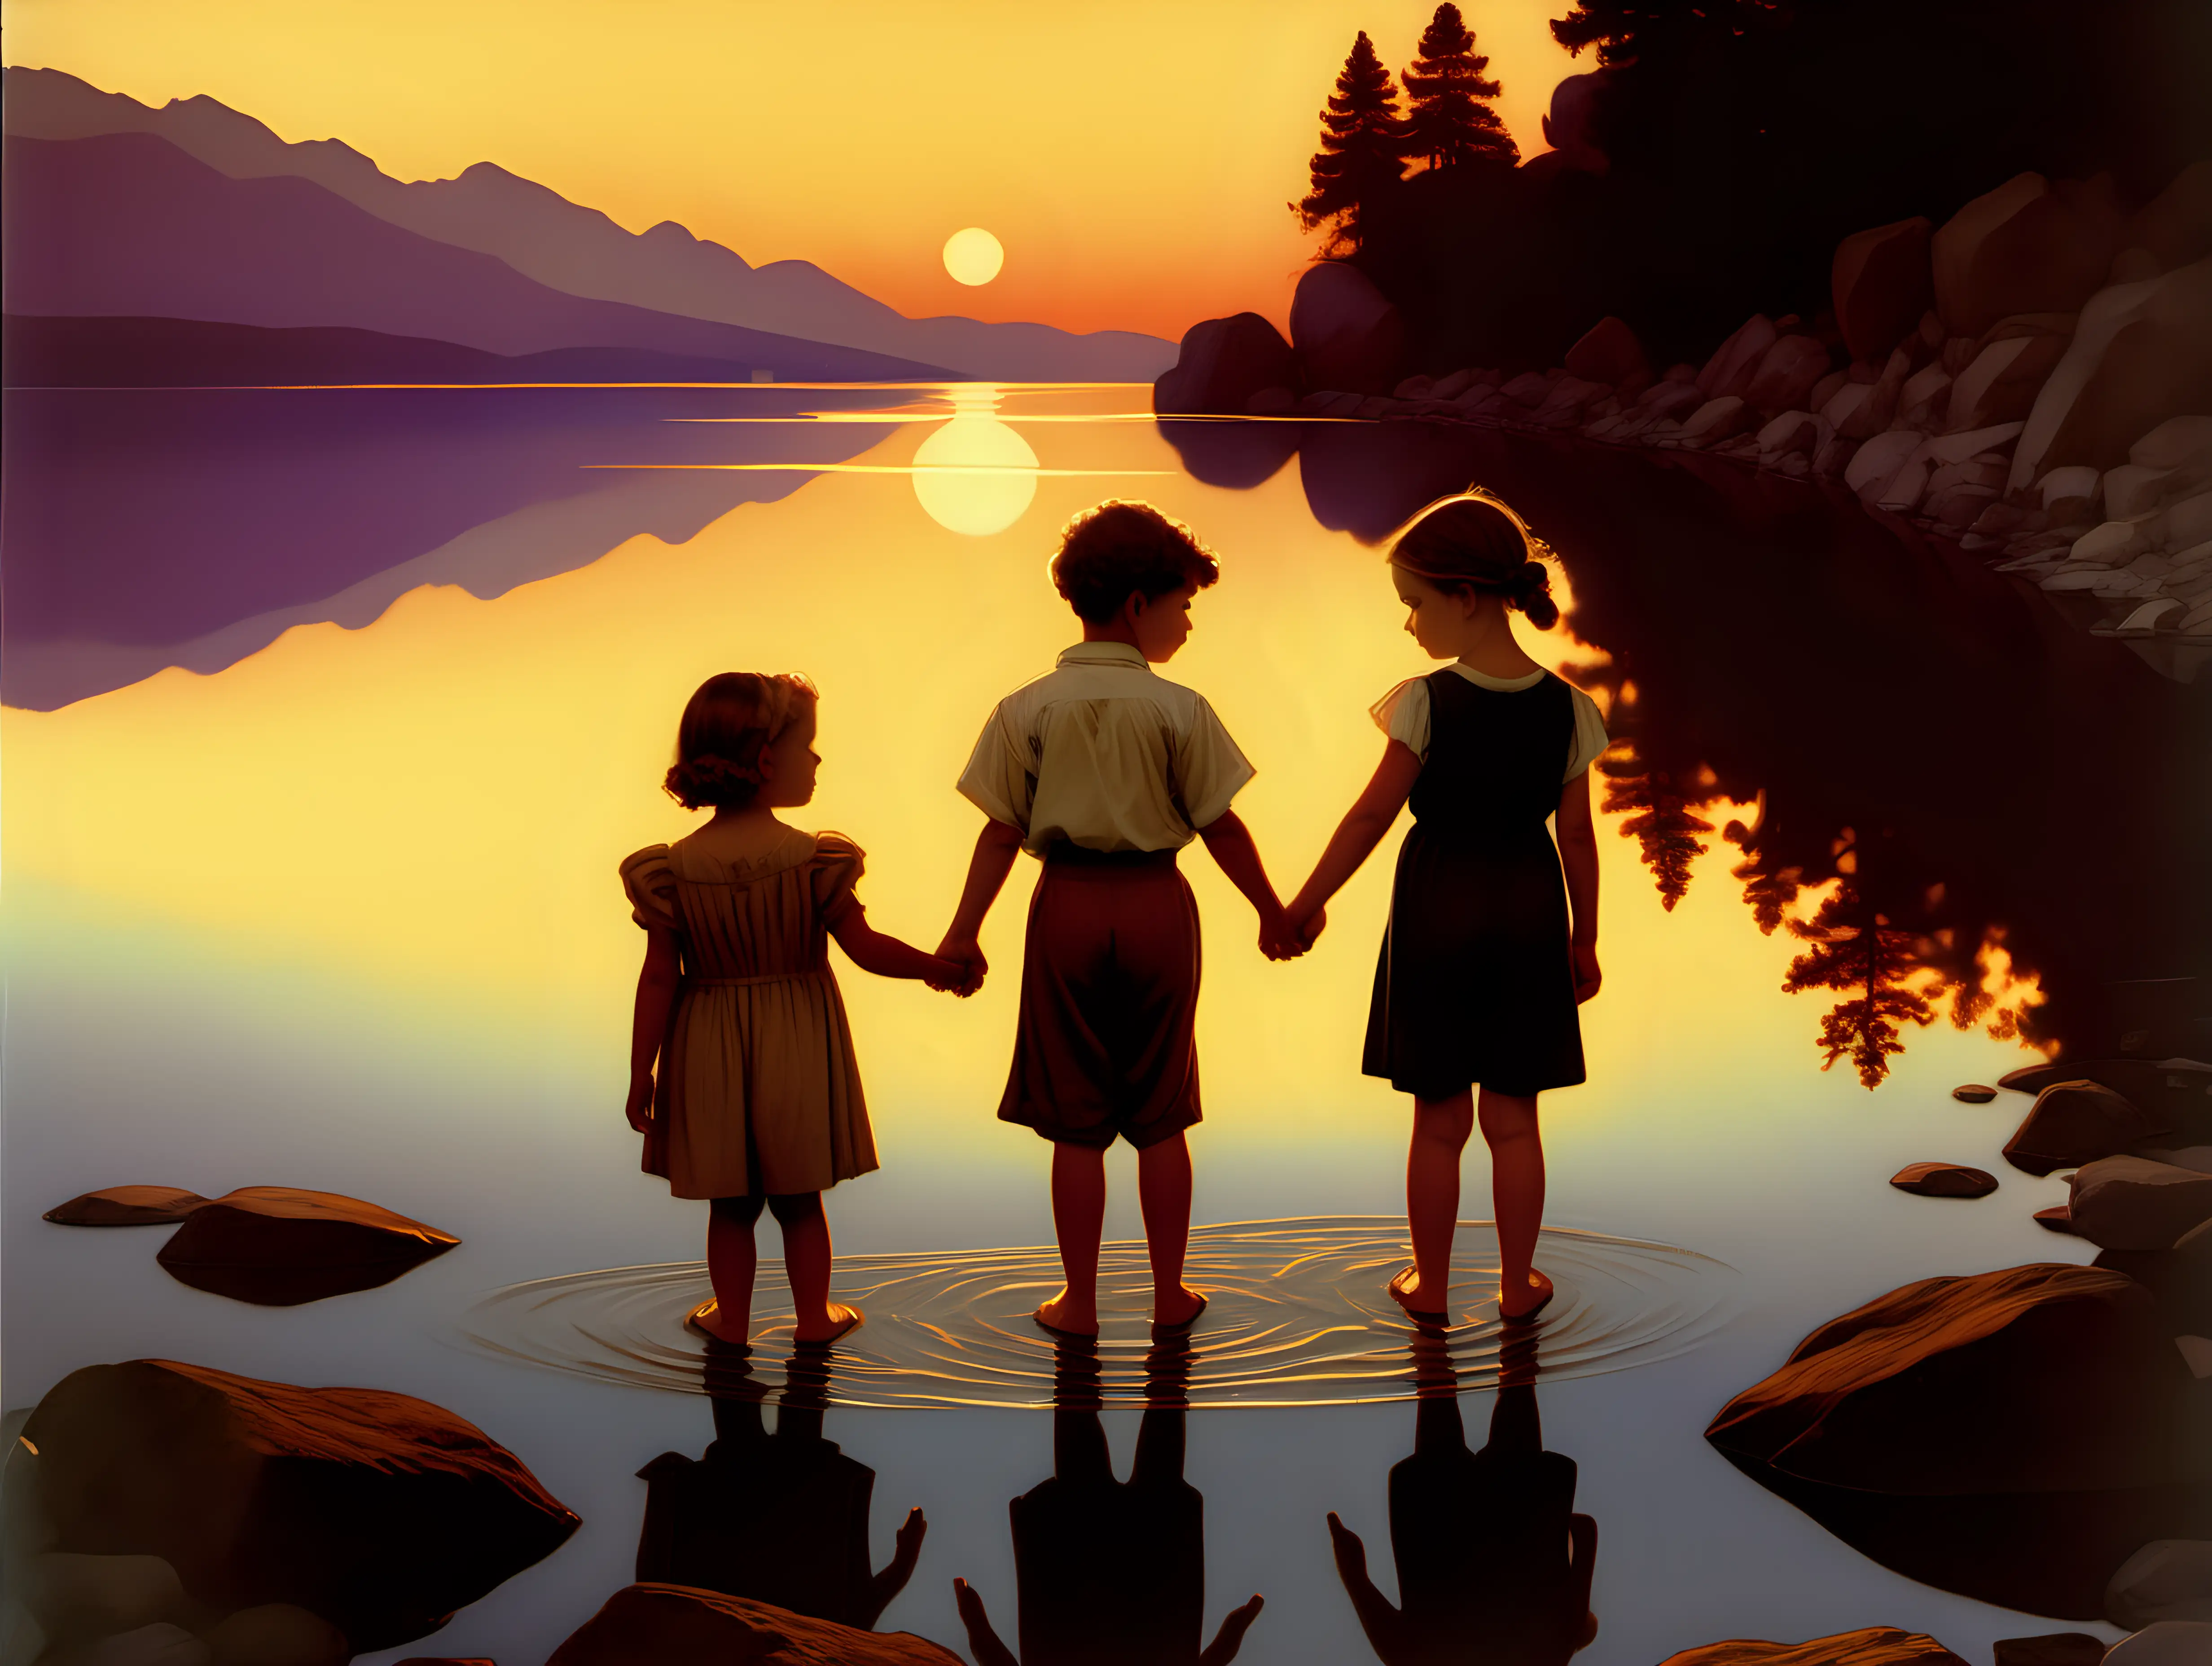 little boy and girl holding hands at water edge as sun goes down Maxfield Parrish style